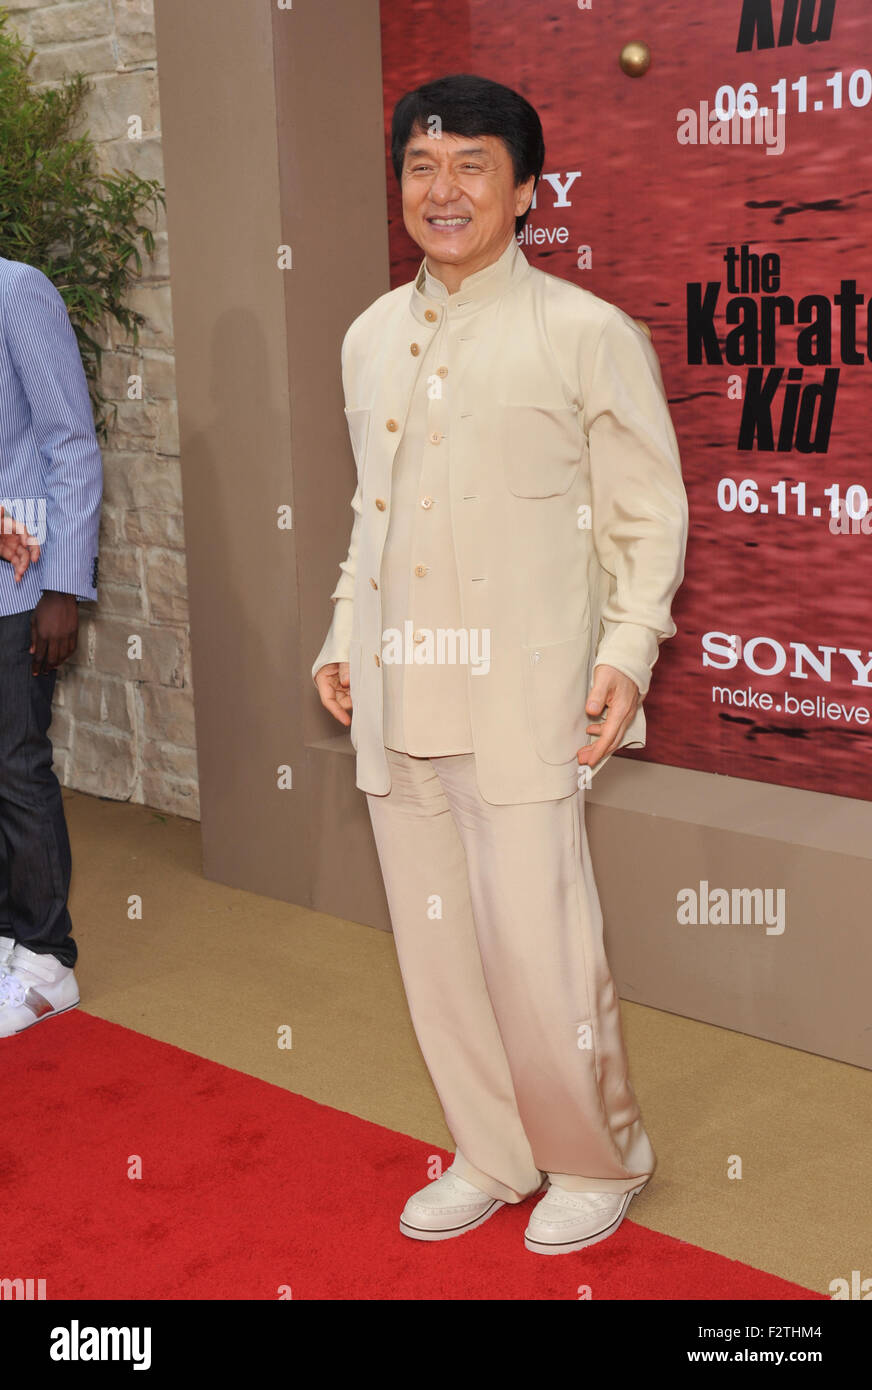 LOS ANGELES, CA - JUNE 6, 2010: Jackie Chan at the Los Angeles premiere of his new movie "The Karate Kid" at Mann Village Theatre, Westwood. Stock Photo